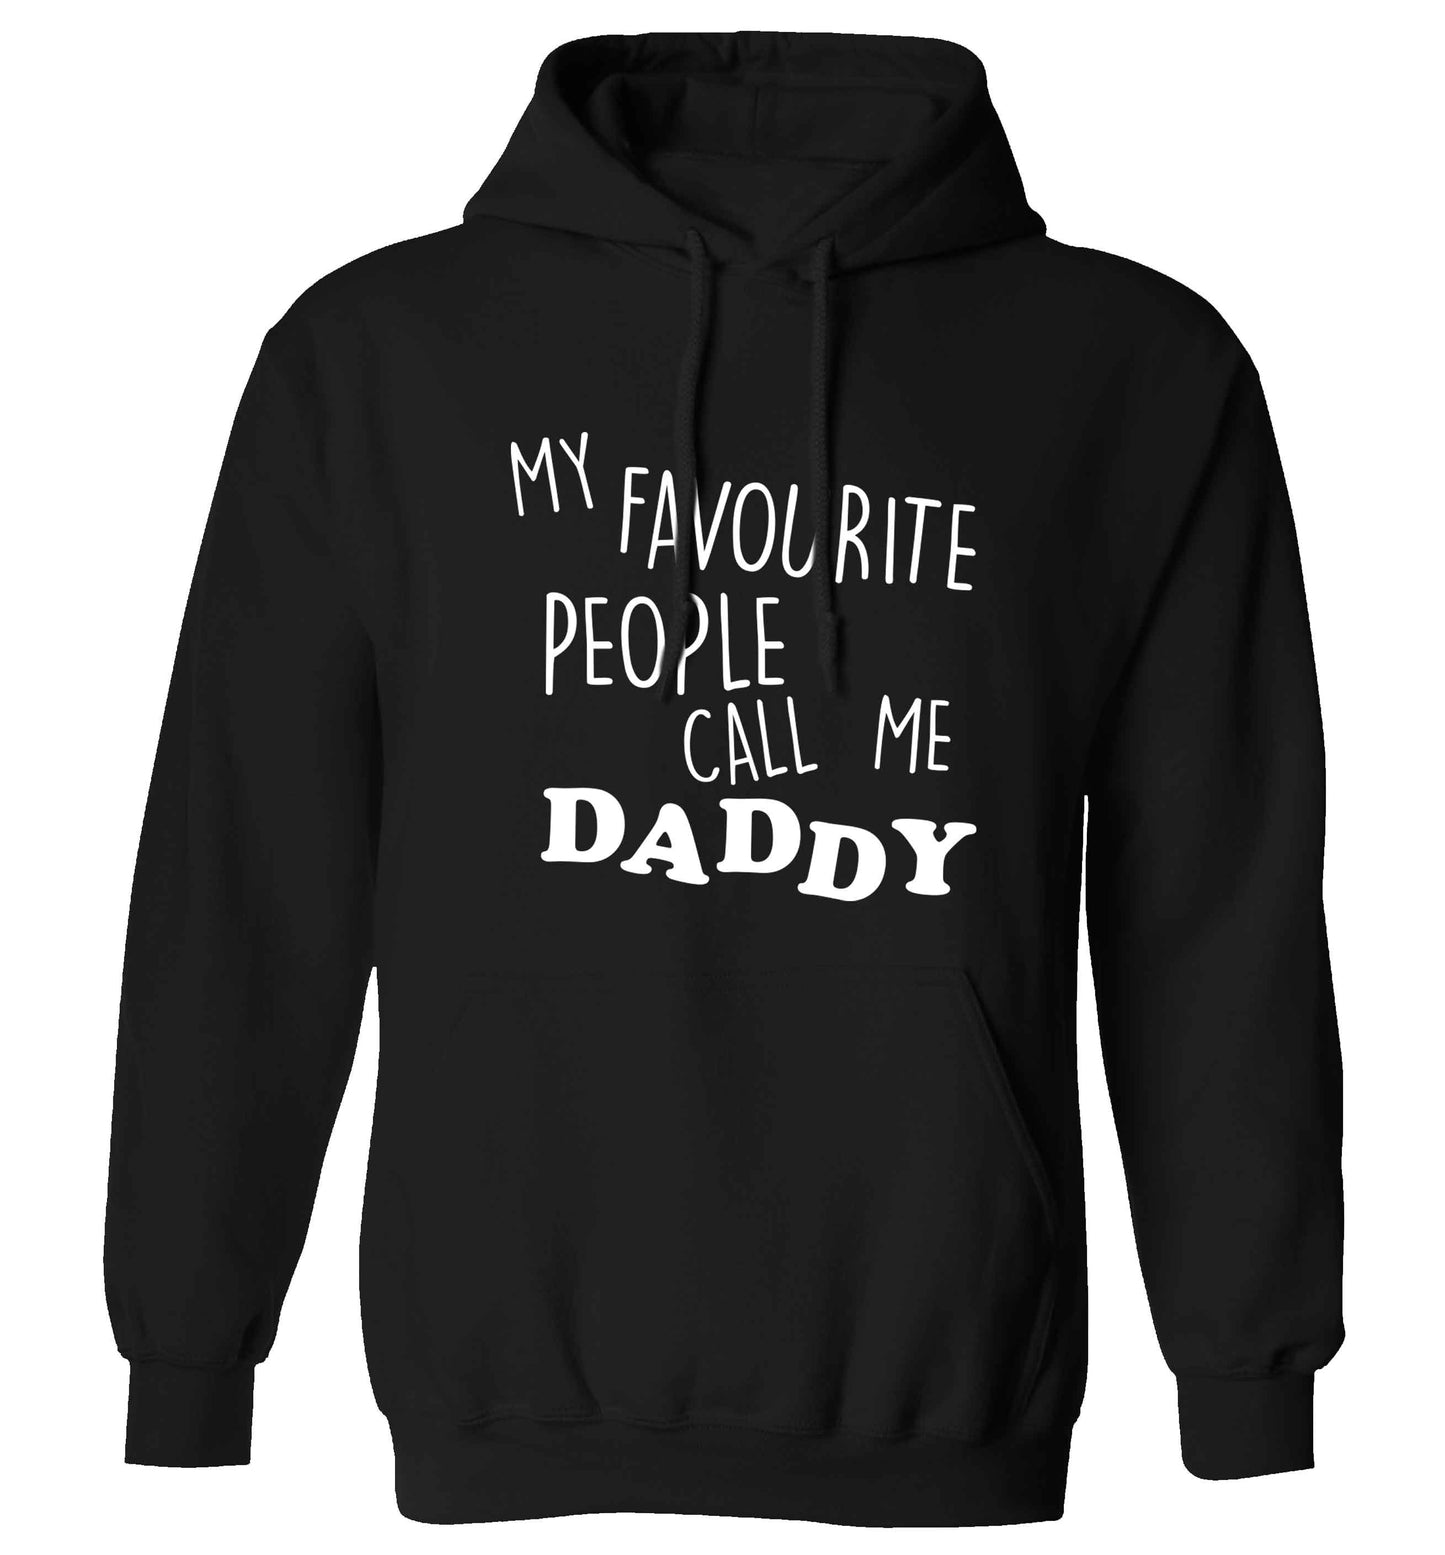 My favourite people call me daddy adults unisex black hoodie 2XL